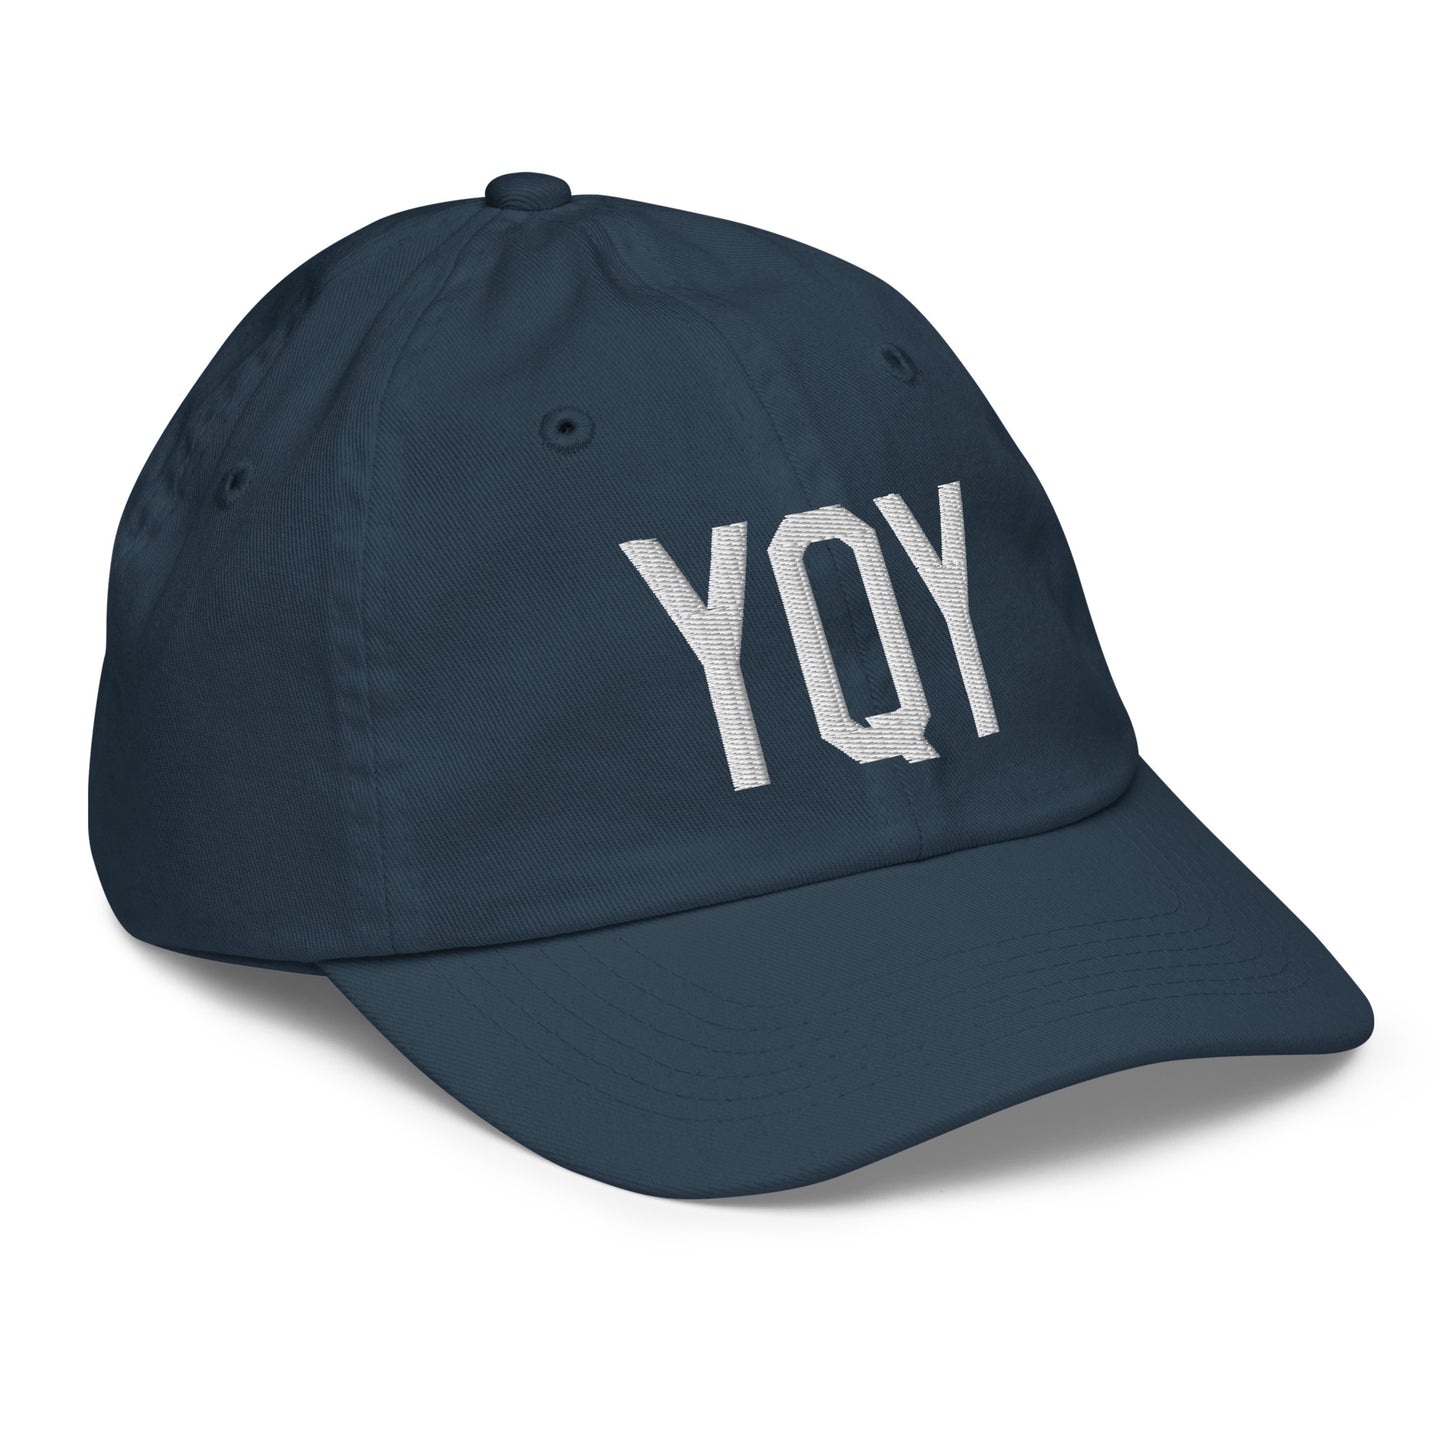 Airport Code Kid's Baseball Cap - White • YQY Sydney • YHM Designs - Image 15